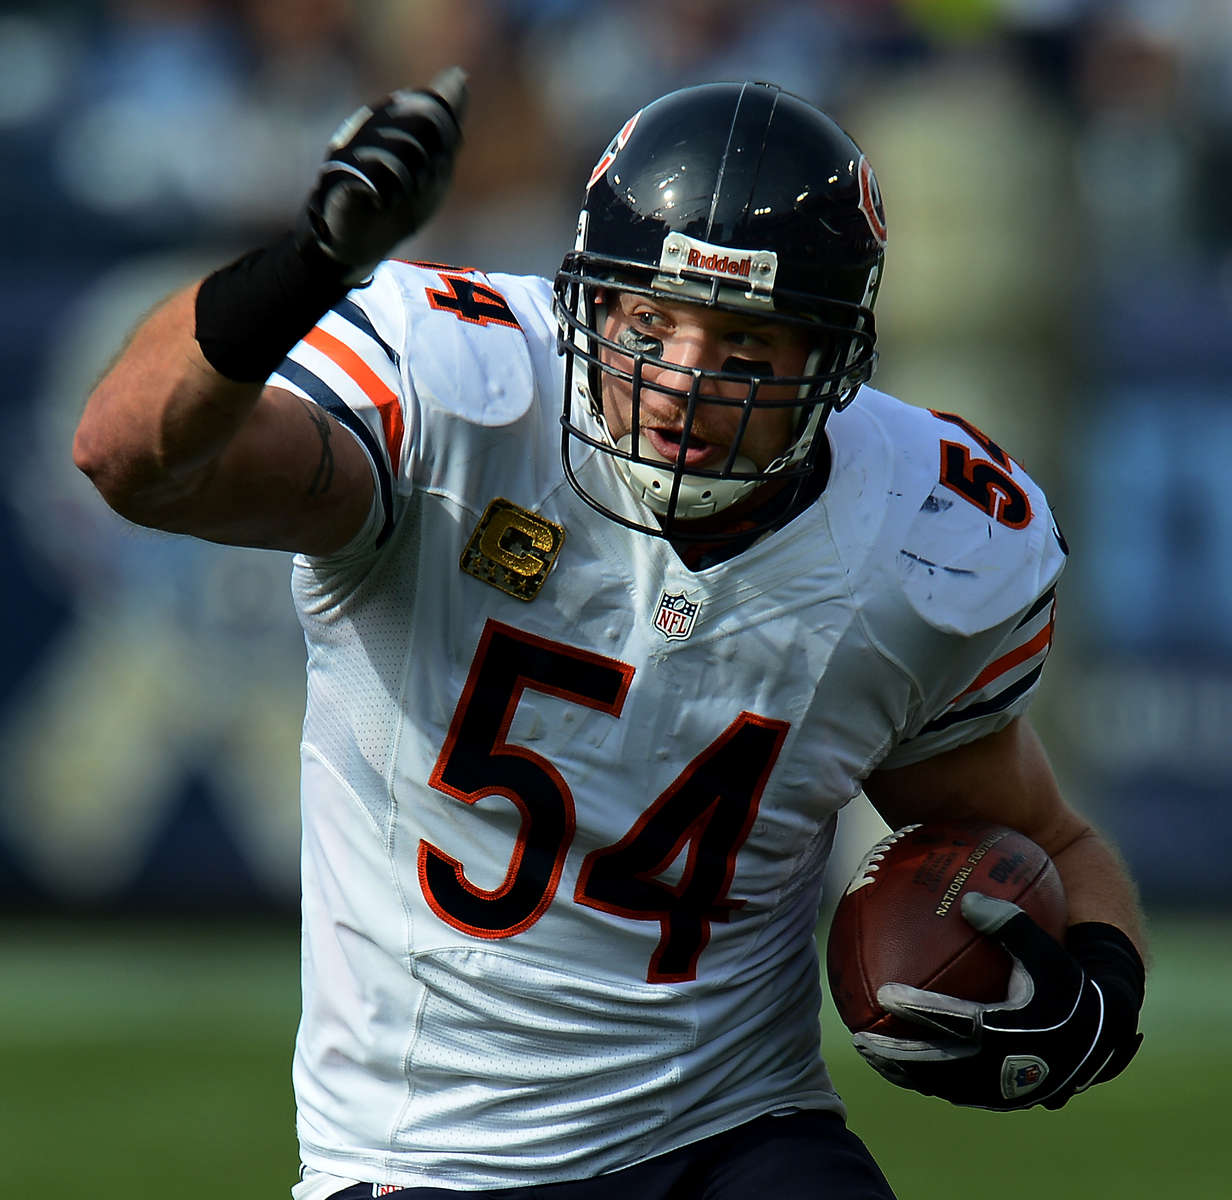 Chicago Bears middle linebacker Brian Urlacher runs to the end zone after intercepting pass against the Tenneessee Titans Sunday, Nov. 4, 2012 in Nashville, Tenn. (The Tennessean/ Mark Zaleski)